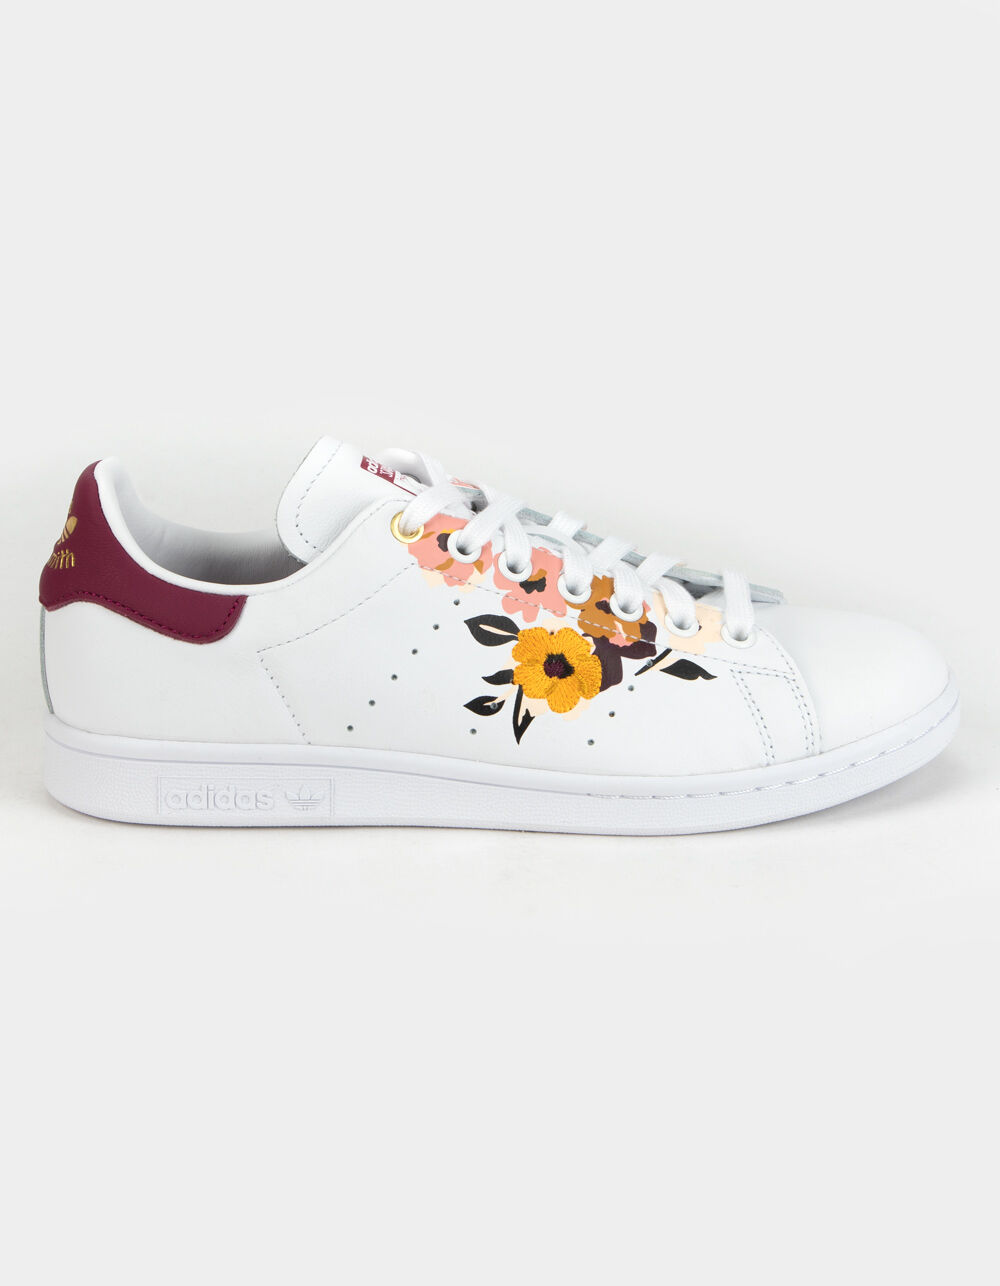 Women's Adidas Stan Smith Floral Print Sneaker ($85) ❤ liked on Polyvore  featuring shoes, sneakers, adidas tr…